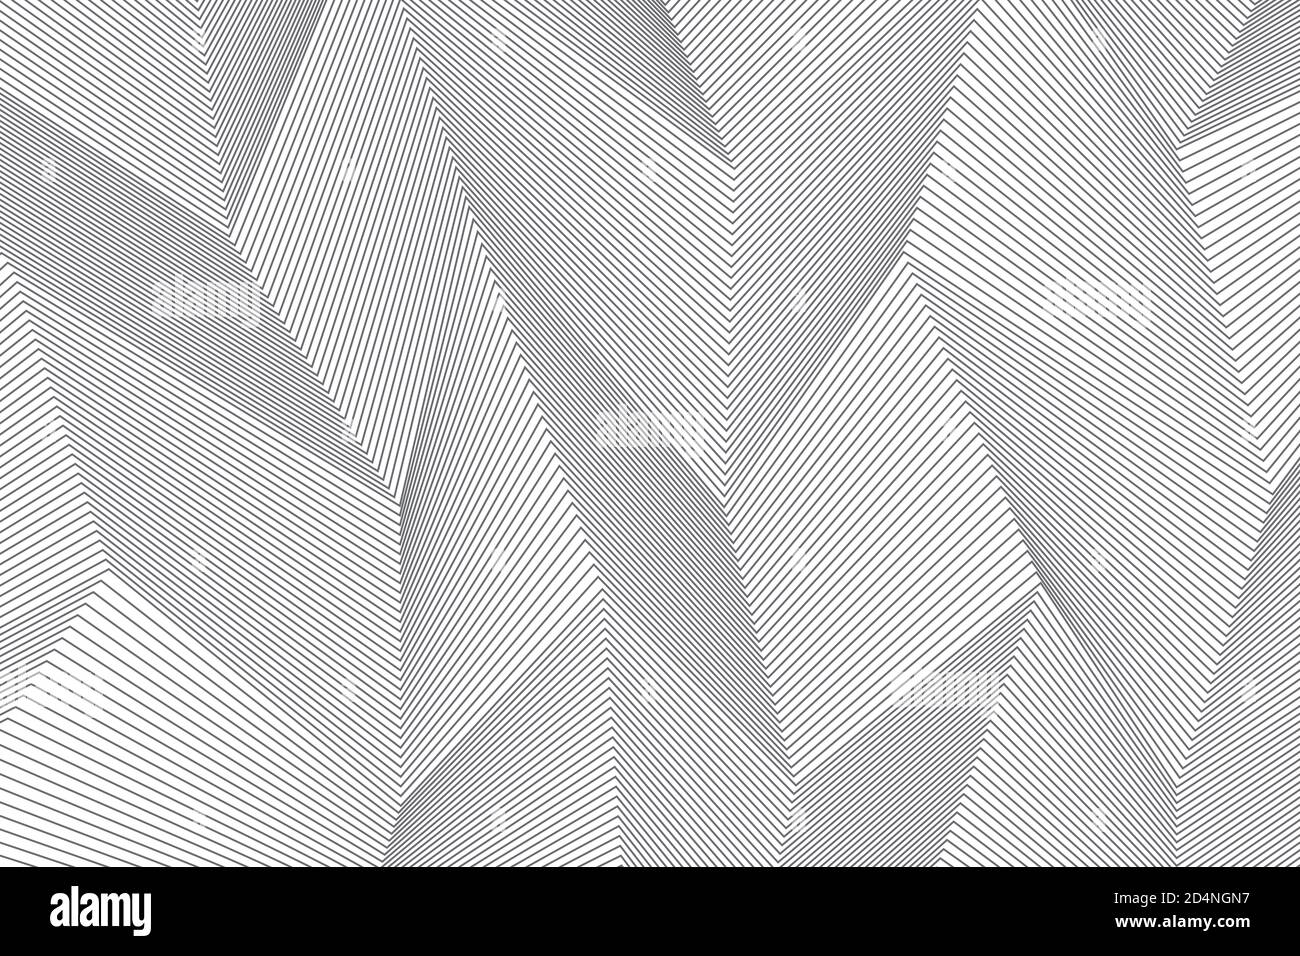 Abstract background pattern made with repeated lines forming 3 dimensional geometric forms. Modern, simple and architectural vector art. Stock Photo